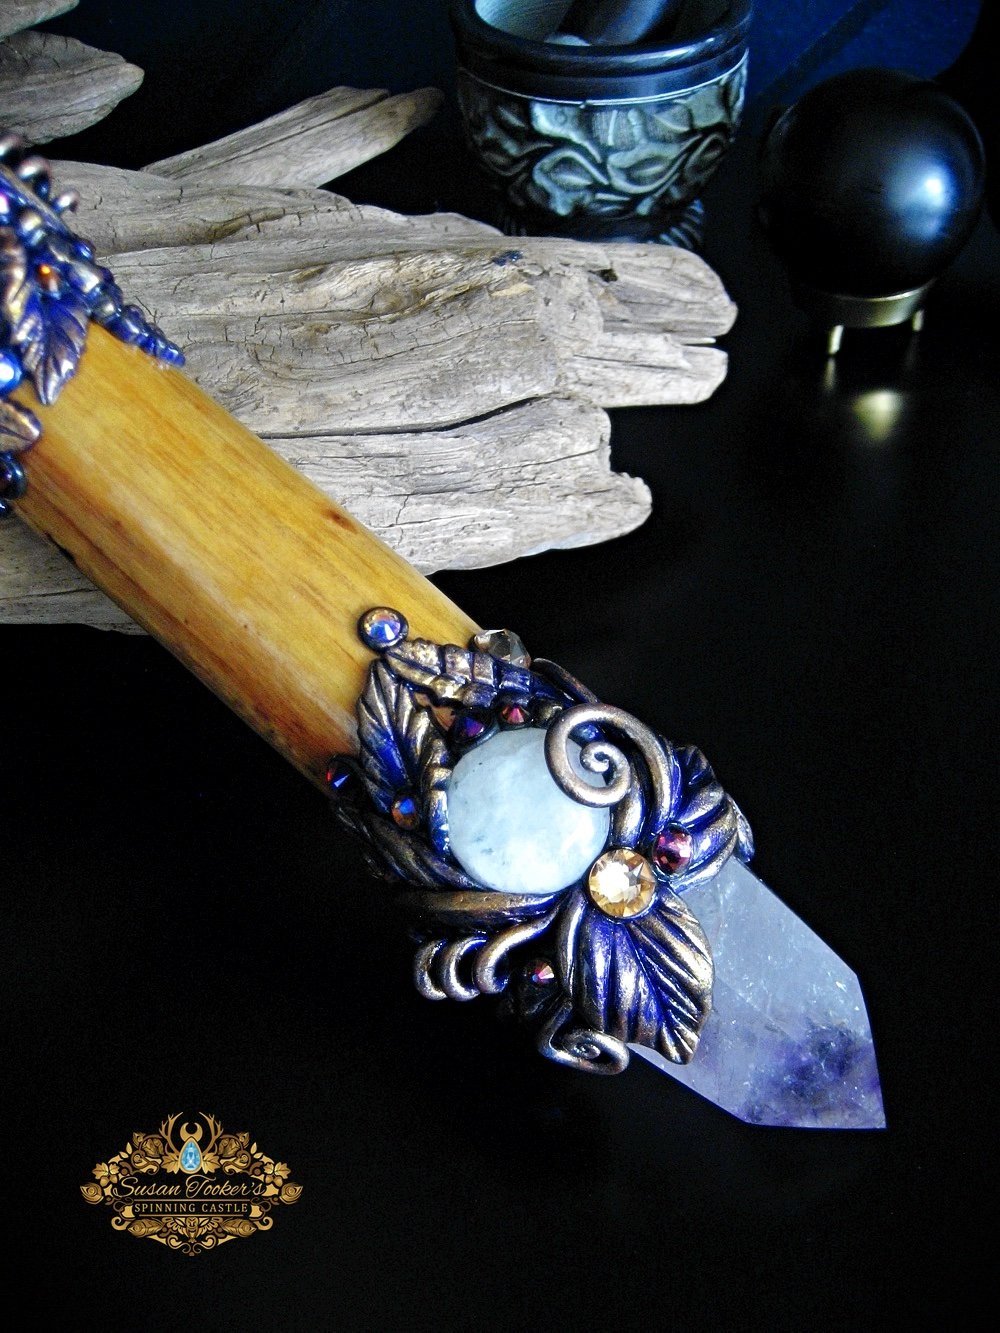 Image of ROYAL GUARDIAN - Ornamental Ritual Athame Amber Glass Blade Charoite Amethyst Witchcraft Art Dagger 